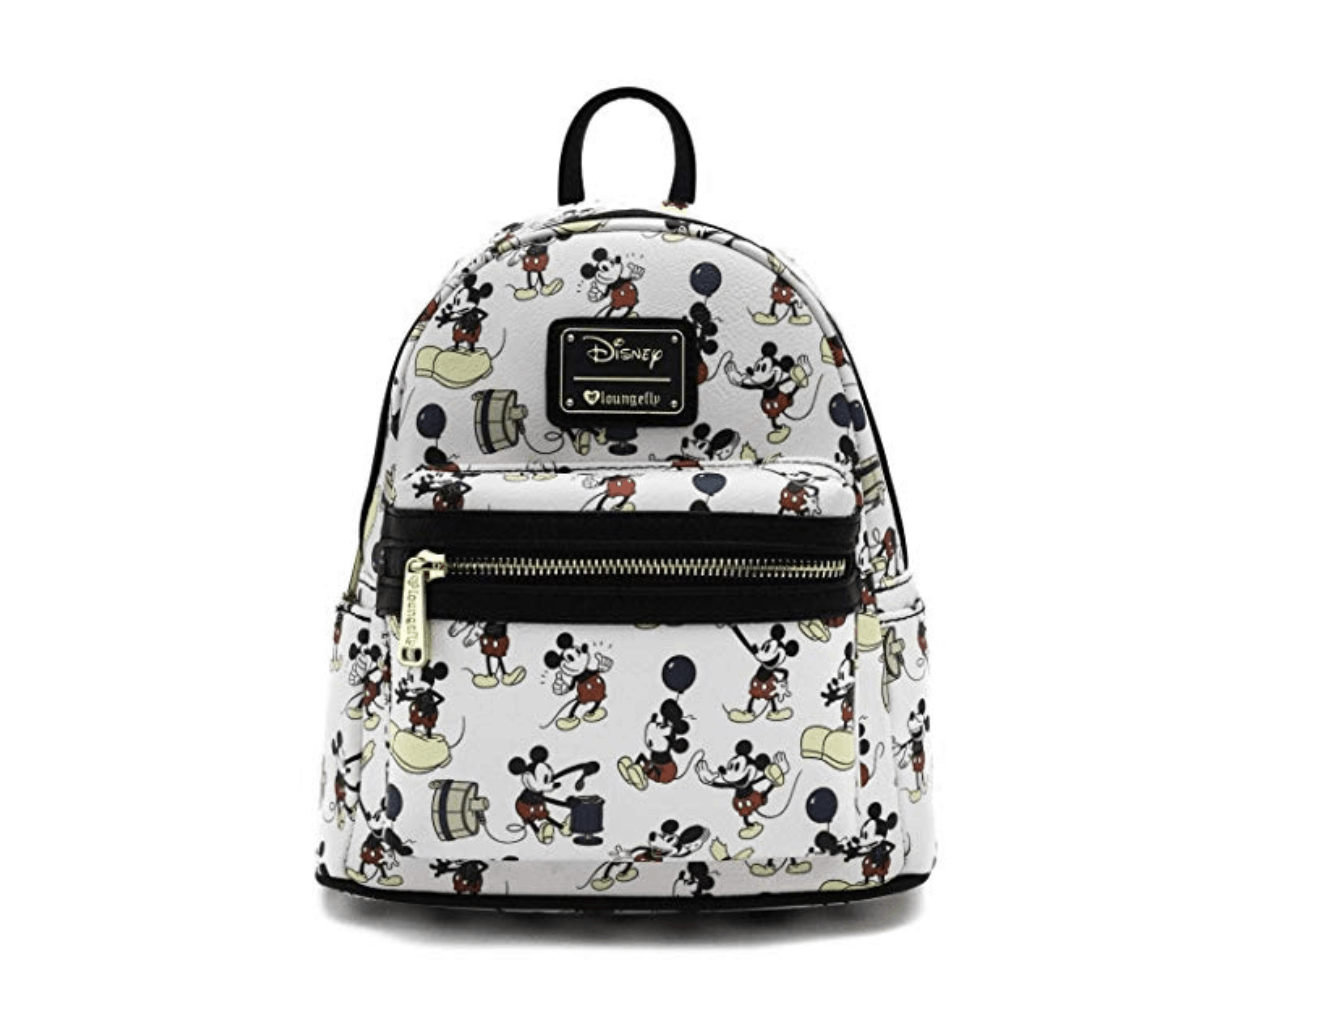 Best Backpacks For Disney For Adults That Are Stylish | How to pack for disney 